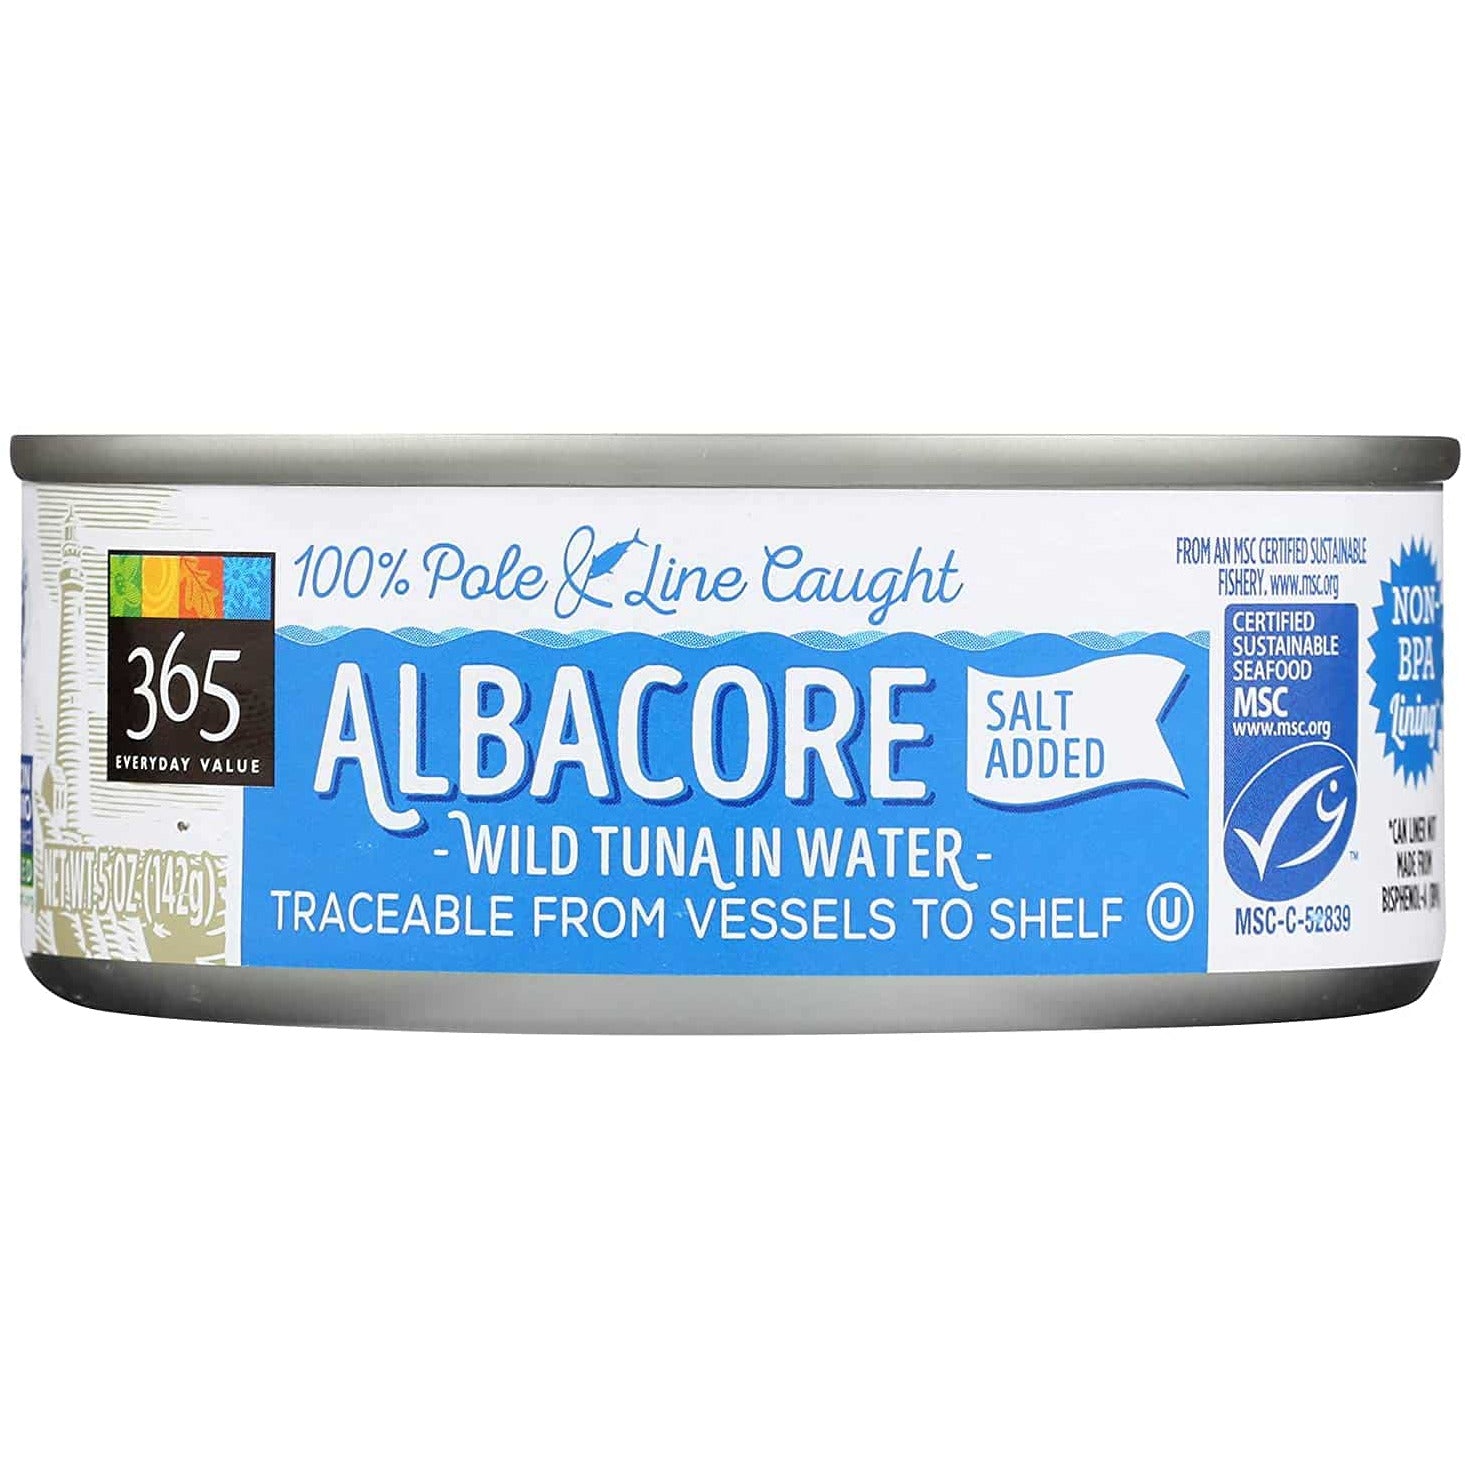 Canned Wild Tuna, Albacore in Water with Salt Added (100% Pole & Line  Caught), 5 oz at Whole Foods Market